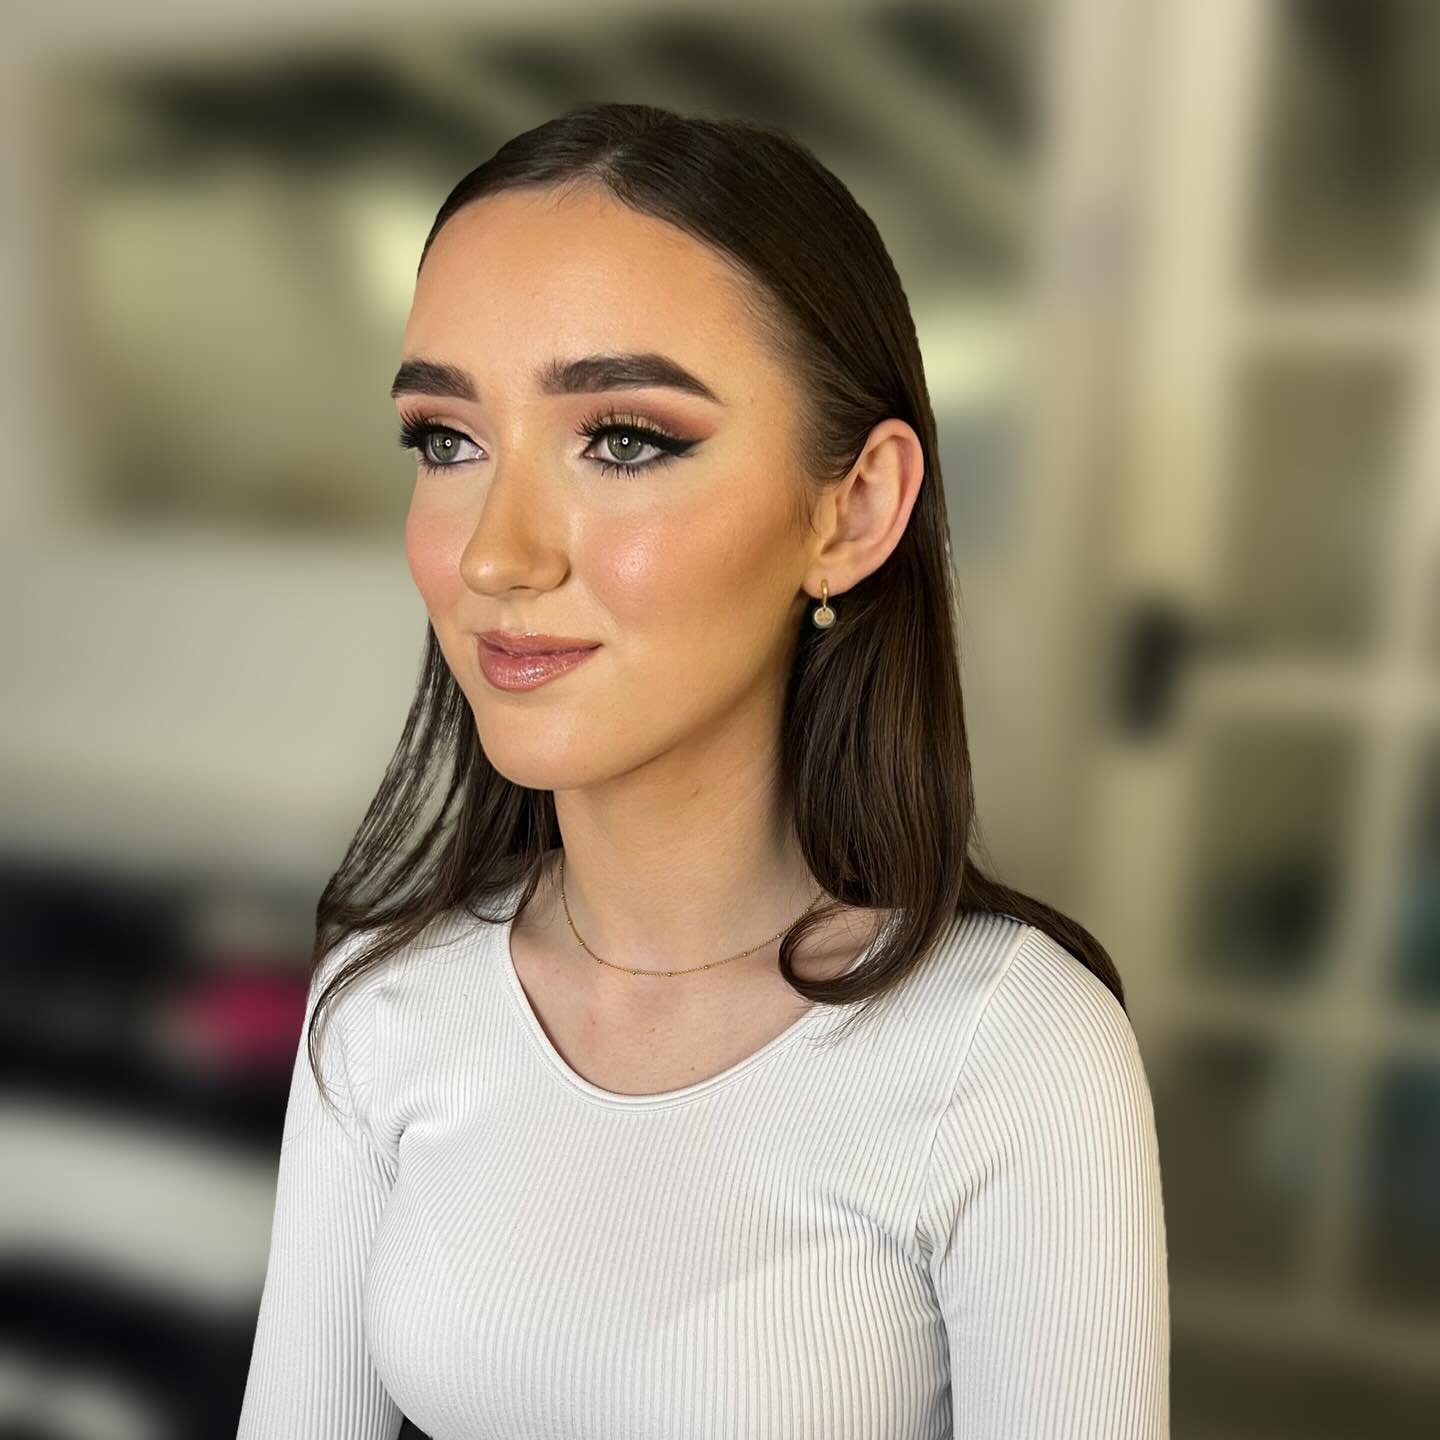 The most beautiful glam for the most beautiful young lady 💕 in prep for prom we nailed her look and it&rsquo;s an honour to be trusted 💕

Glam appointments available 7days a week contact me for a booking 💗

&bull;&bull;&bull;&bull;&bull;&bull;&bul